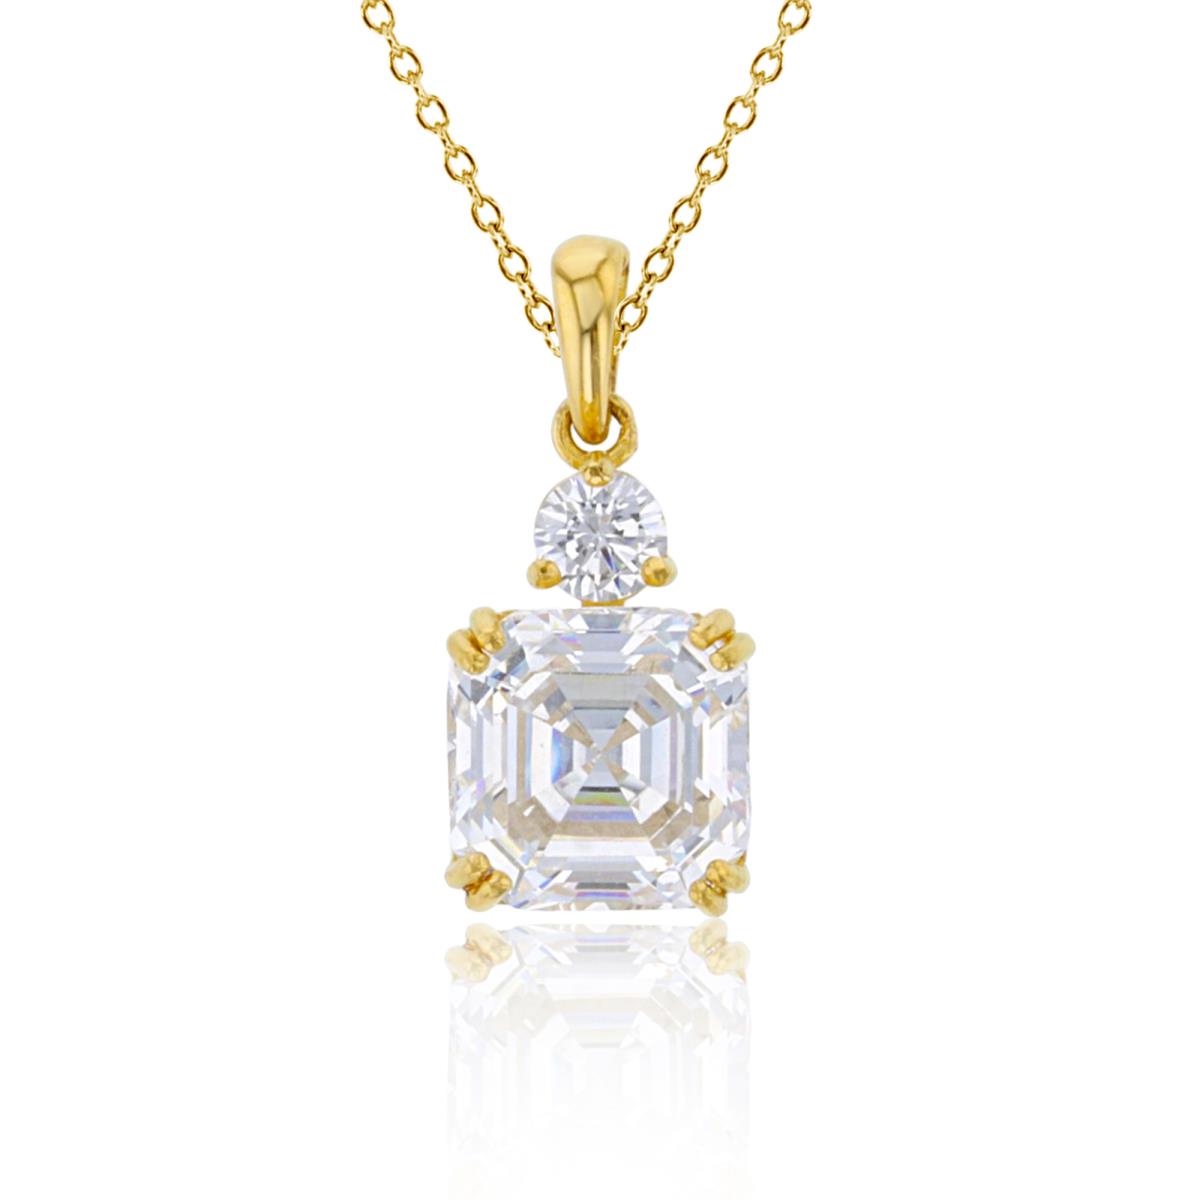 14K Yellow Gold 8mm Cush & 3.5mm Rnd White CZ Solitaire 18"Necklace